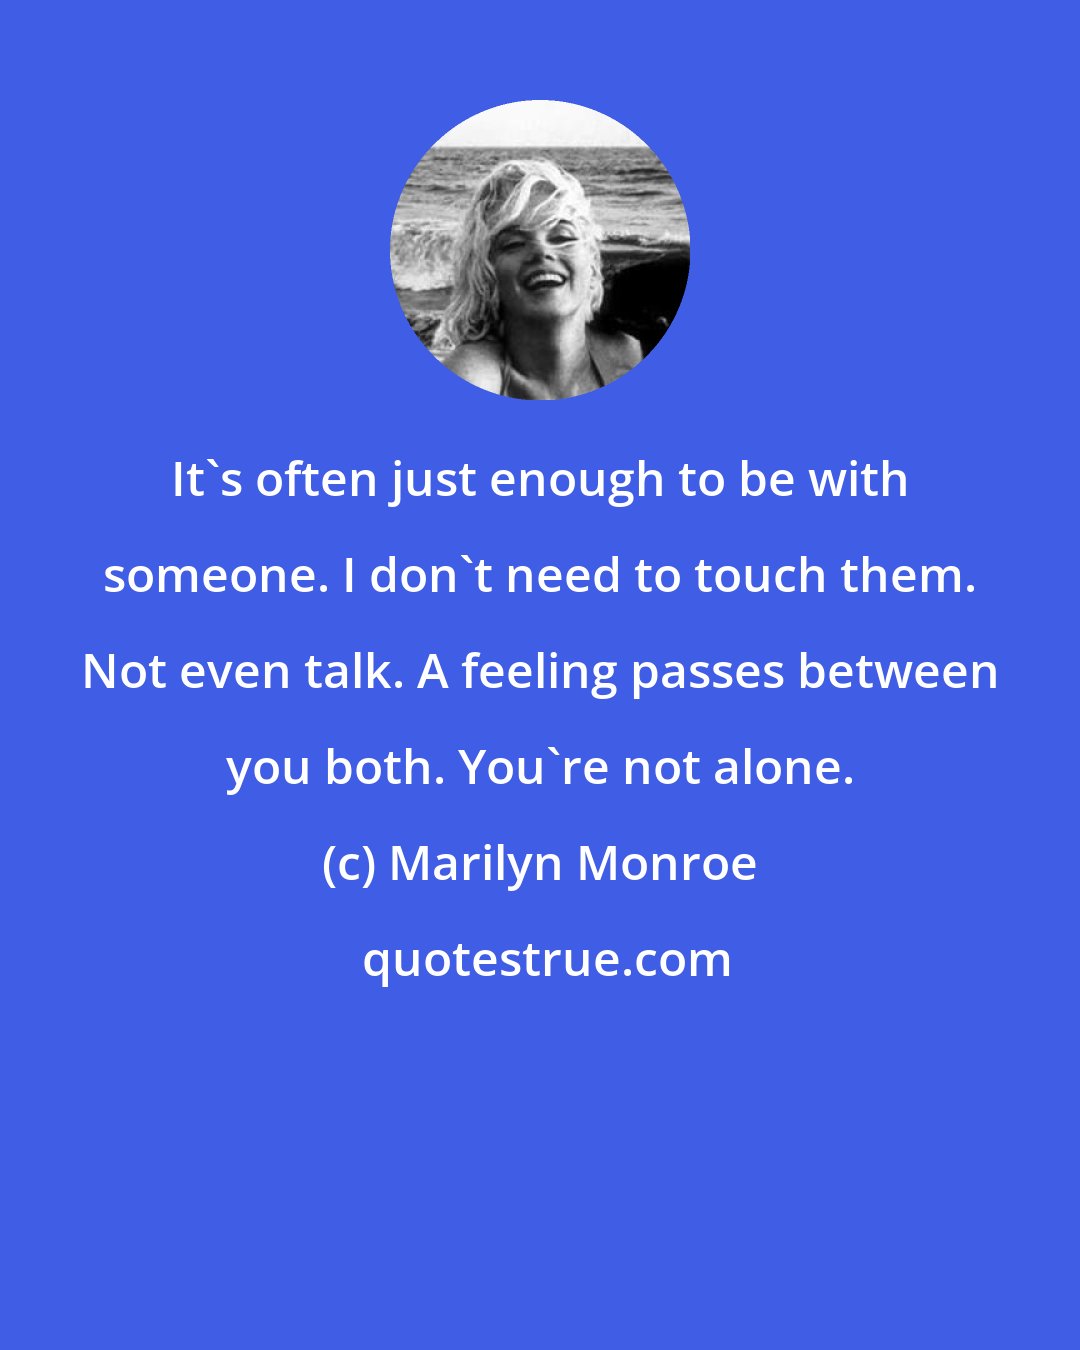 Marilyn Monroe: It's often just enough to be with someone. I don't need to touch them. Not even talk. A feeling passes between you both. You're not alone.